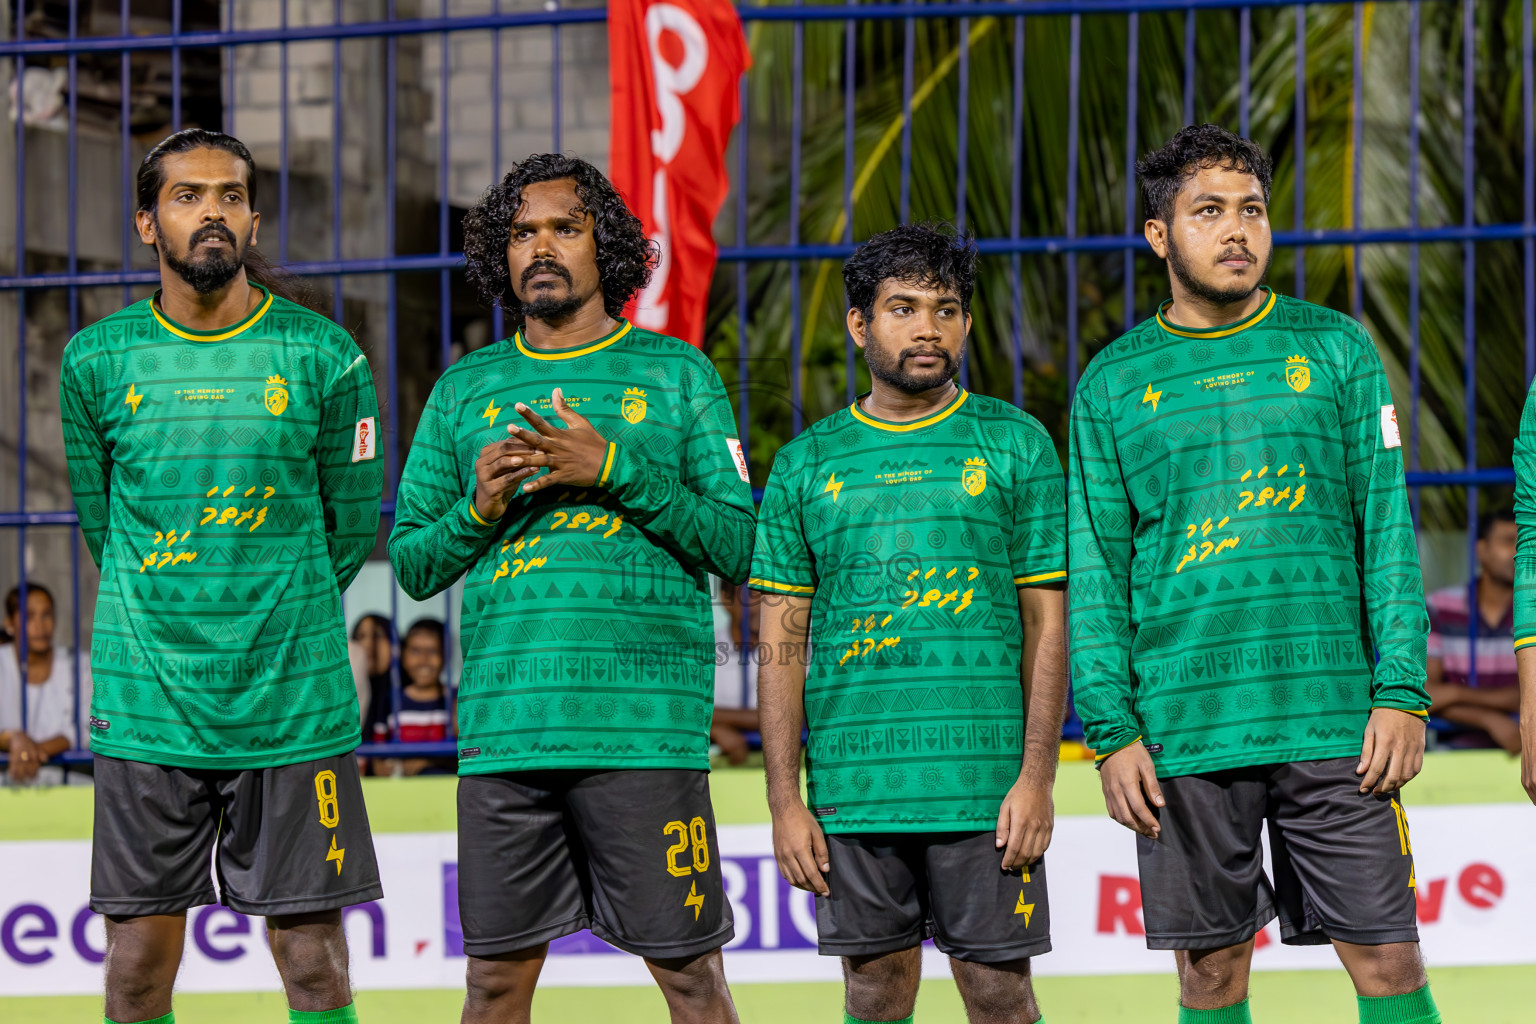 Muring FC vs Afro SC in Semi Final of Eydhafushi Futsal Cup 2024 was held on Monday , 15th April 2024, in B Eydhafushi, Maldives Photos: Ismail Thoriq / images.mv